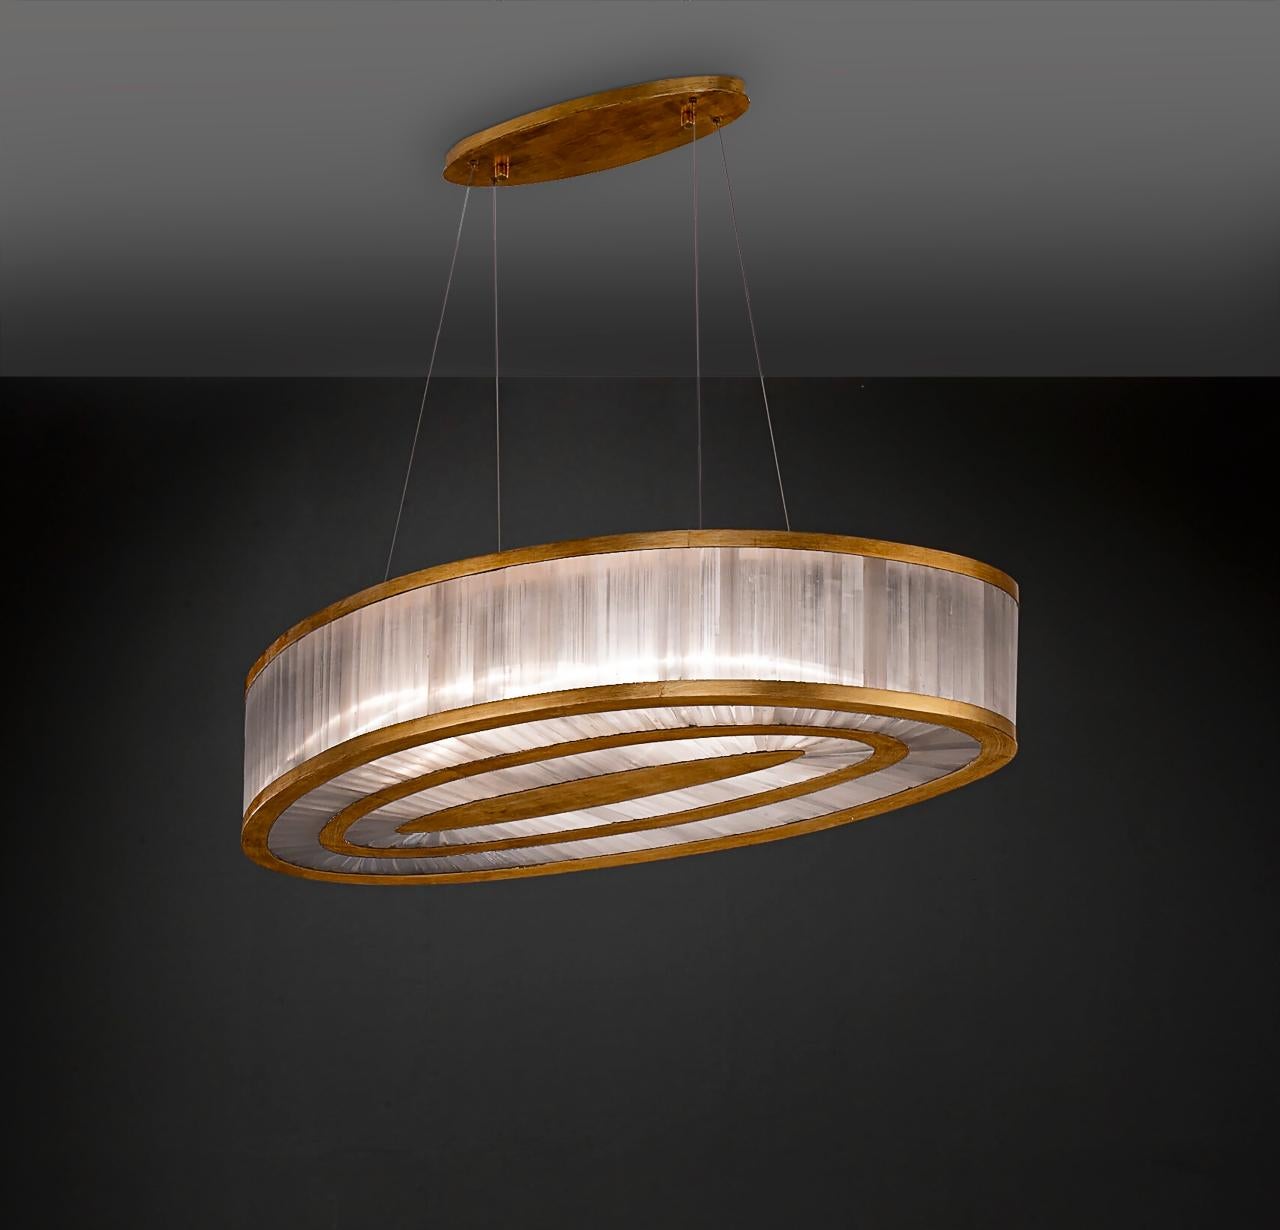 Selenite oval pendant lamp By Aver
Dimensions: D 60 x W 110 x H 21 cm
Materials: Selenite, metal.
Also available: silver leaf, antique silver leaf, gold leaf, brass leaf, copper leaf, pink gold leaf.

Cylindrical pendant with a beautiful manual